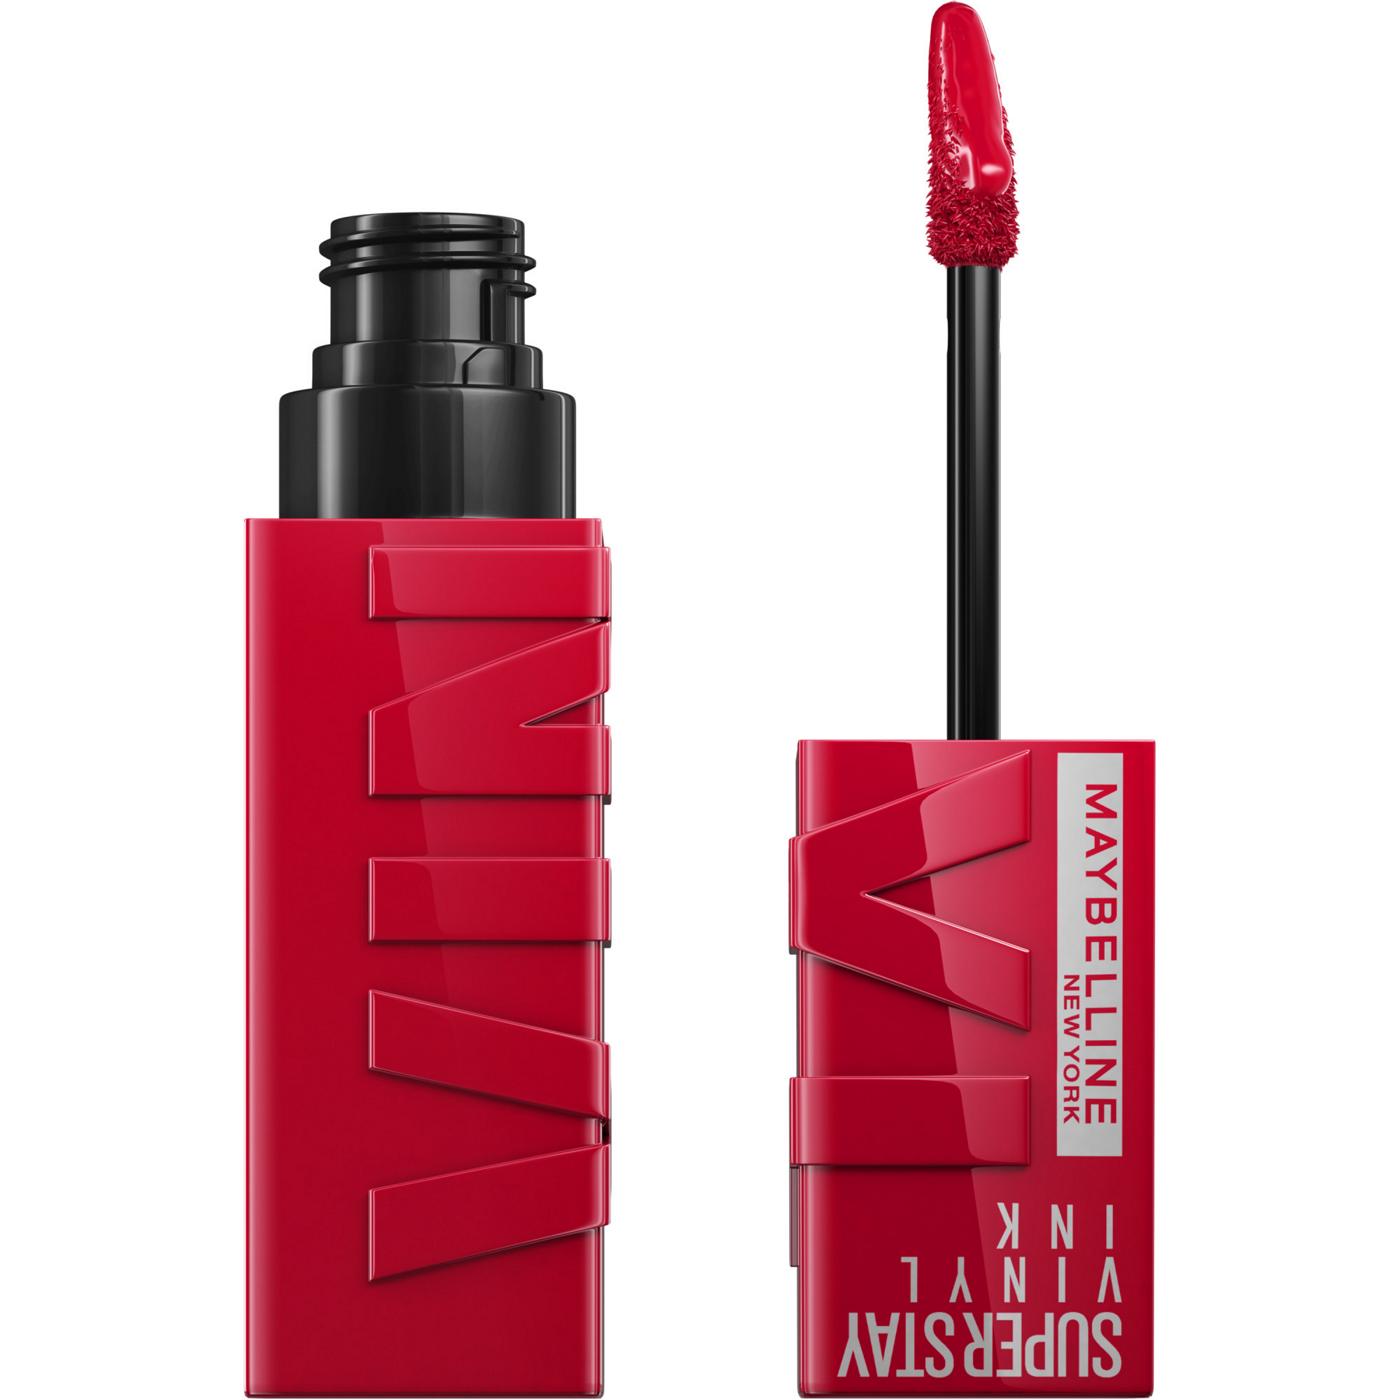 Maybelline Super Stay Vinyl Ink Liquid Lipcolor - Wicked; image 4 of 5